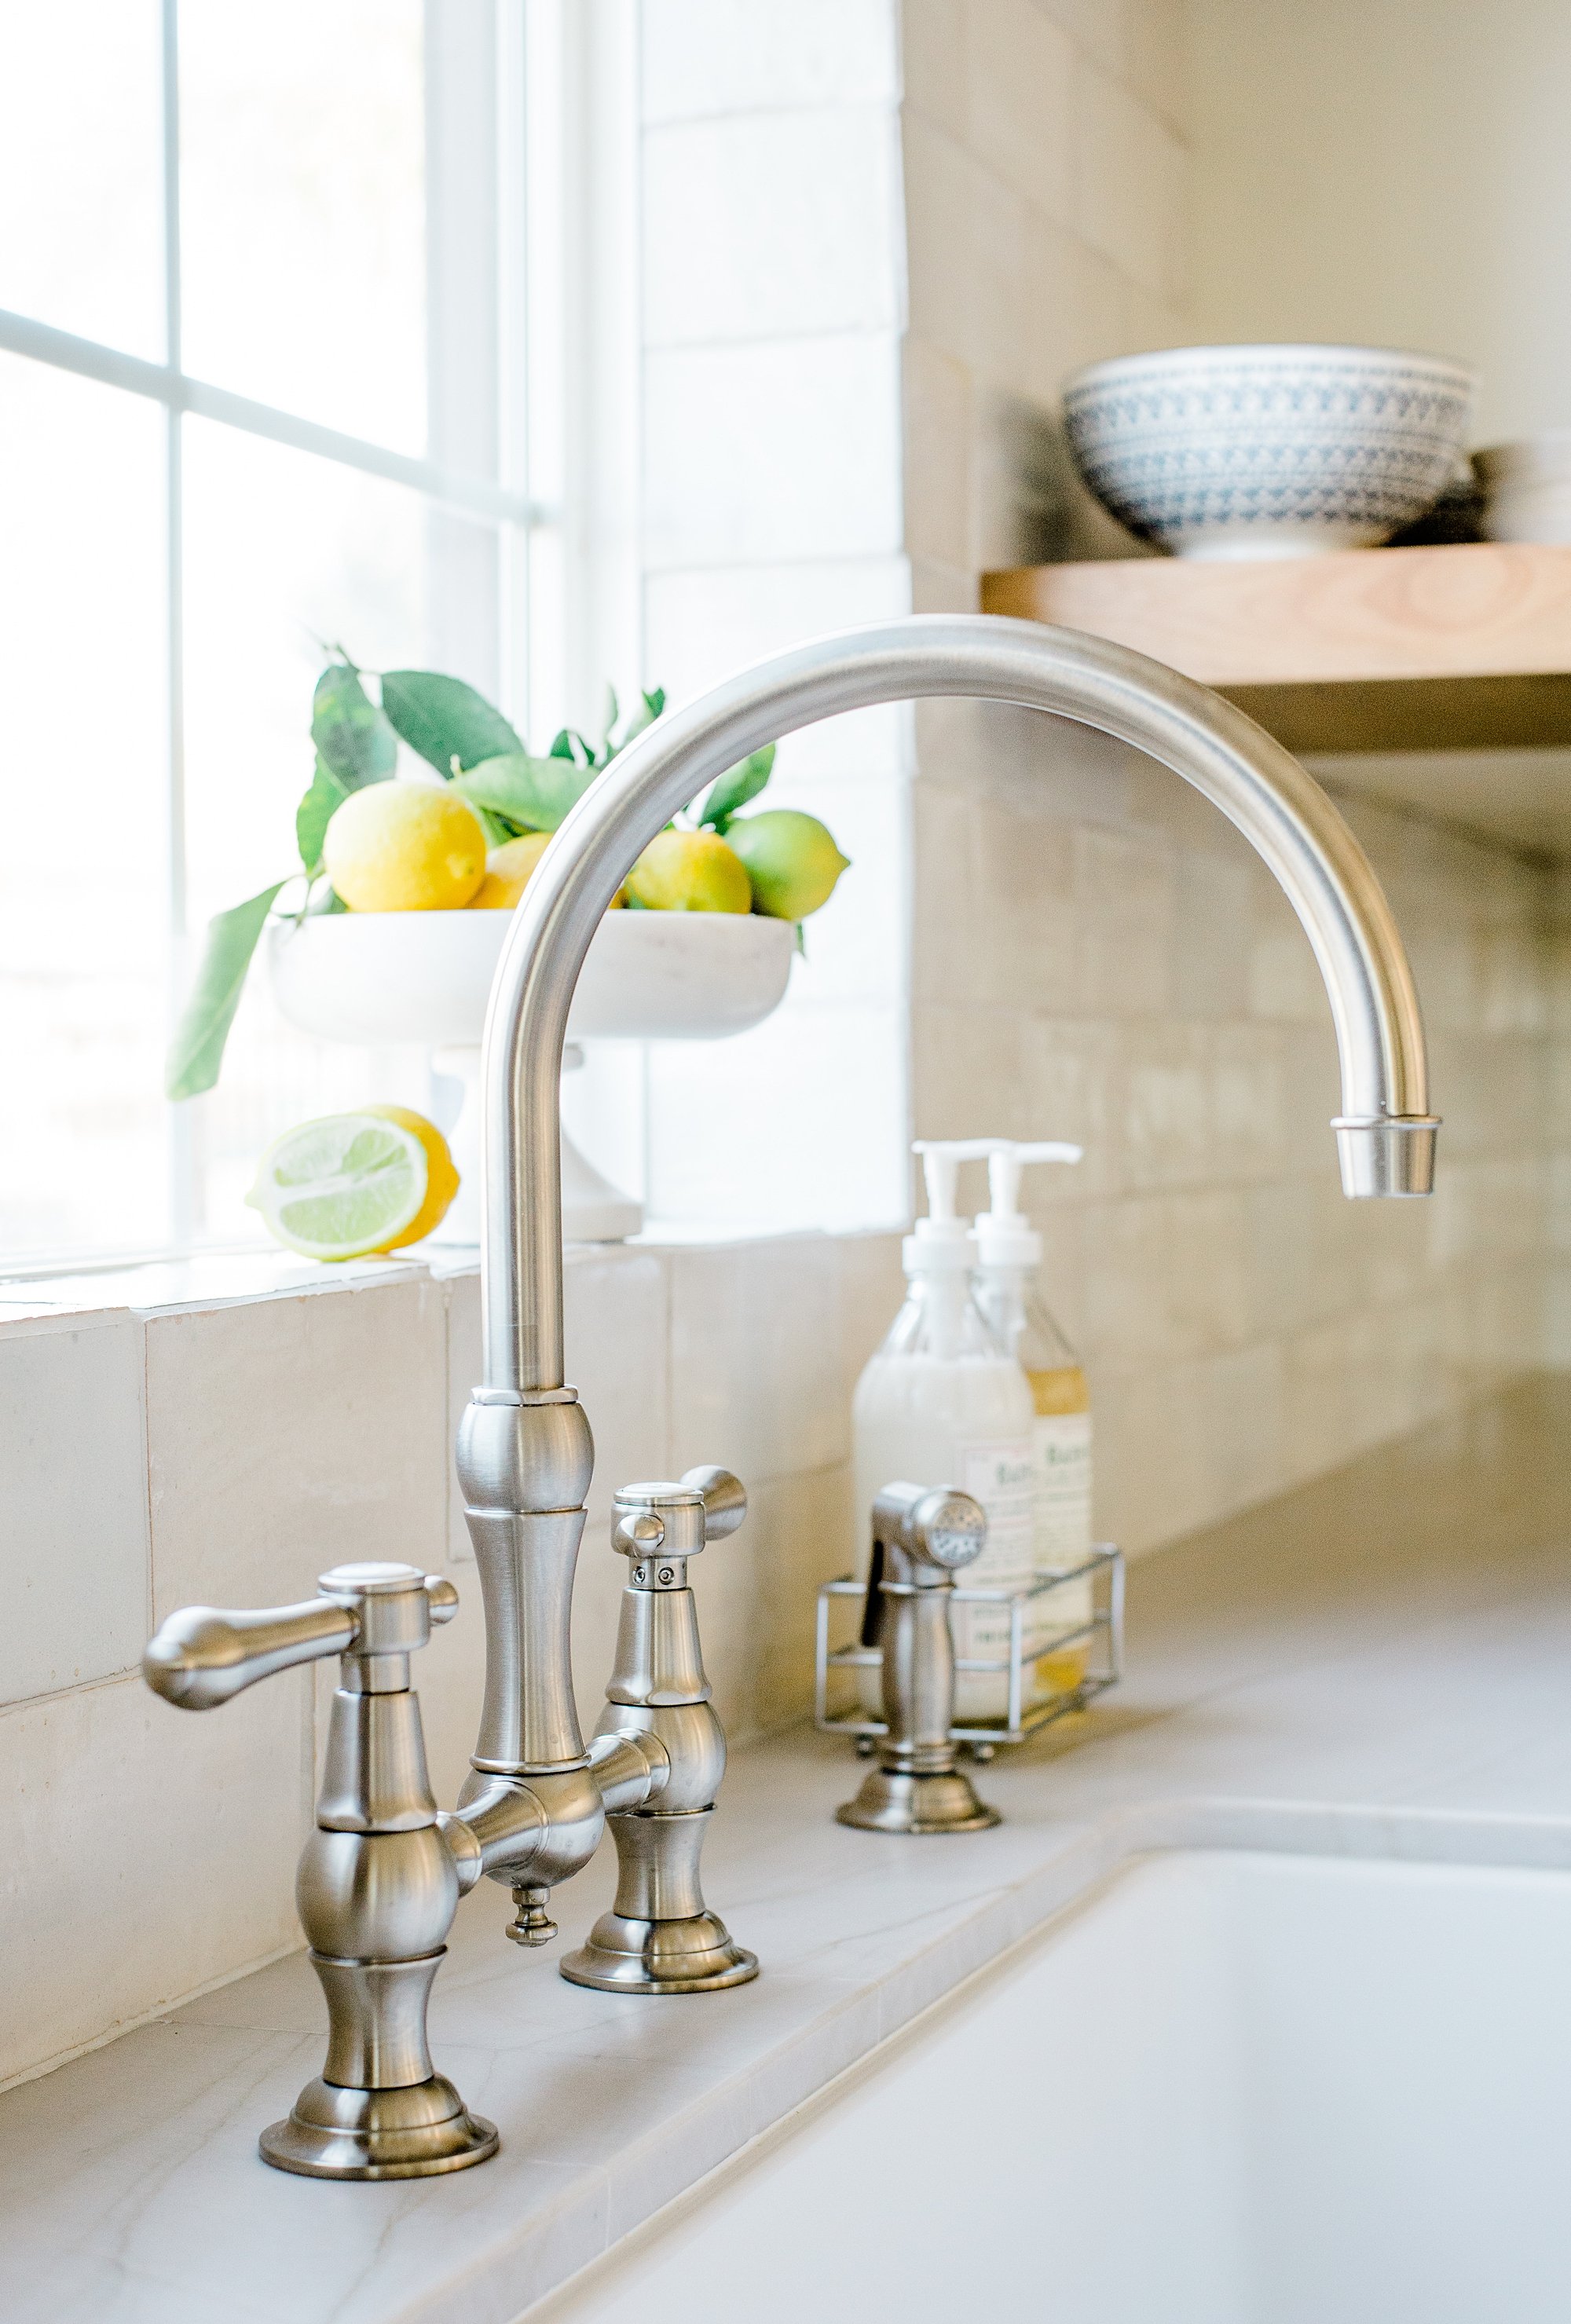  Curved sink hardware adds elegance to the kitchen space  